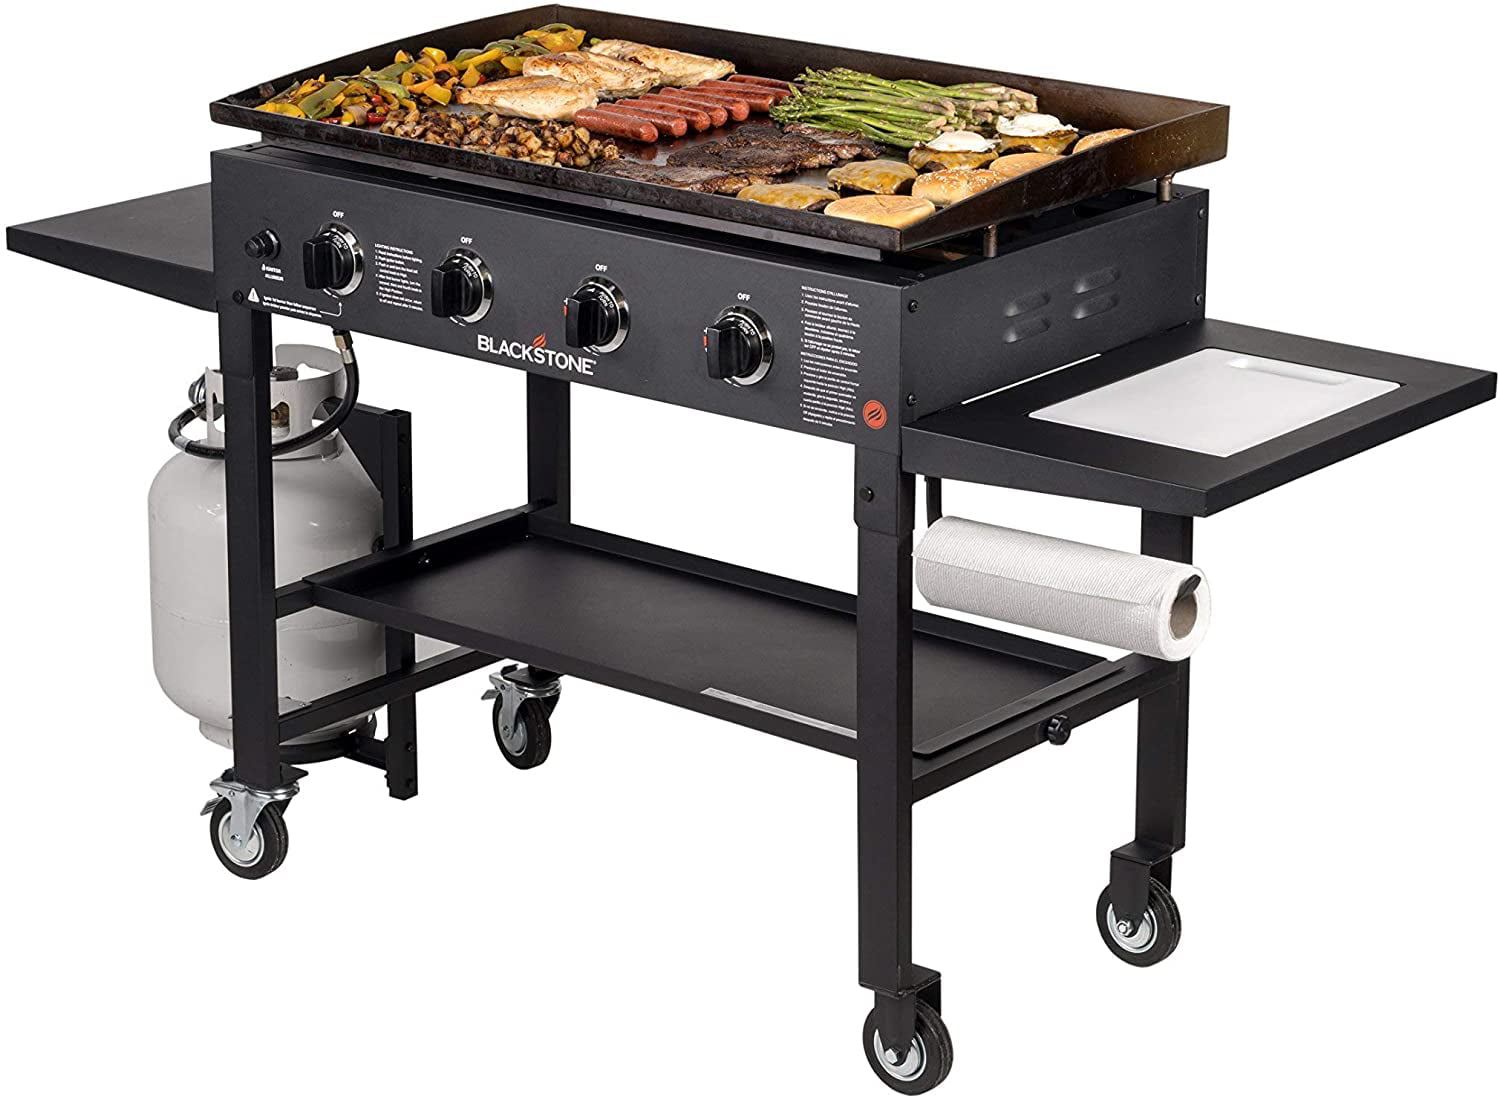 Blackstone 36” griddle with side shelves and full accessories package -  general for sale - by owner - craigslist